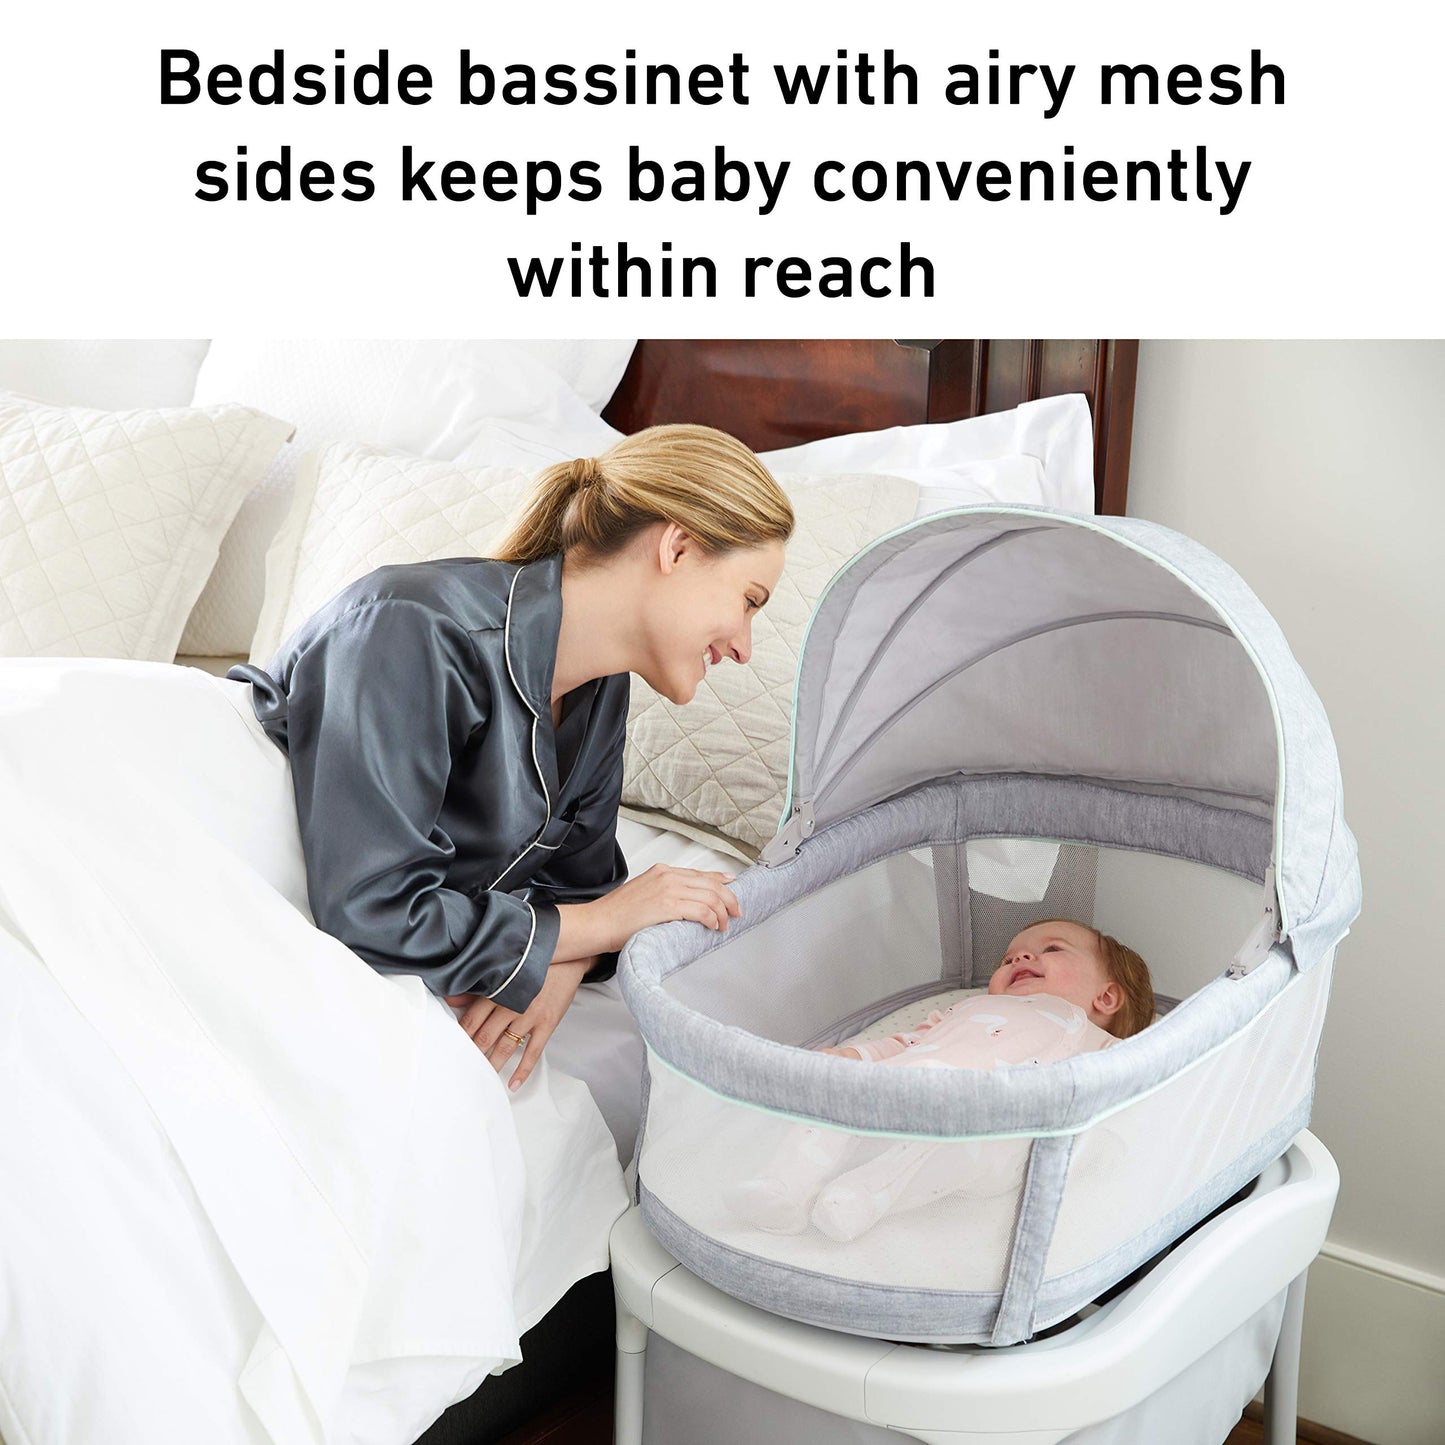 Graco Move 'N Soothe Bassinet